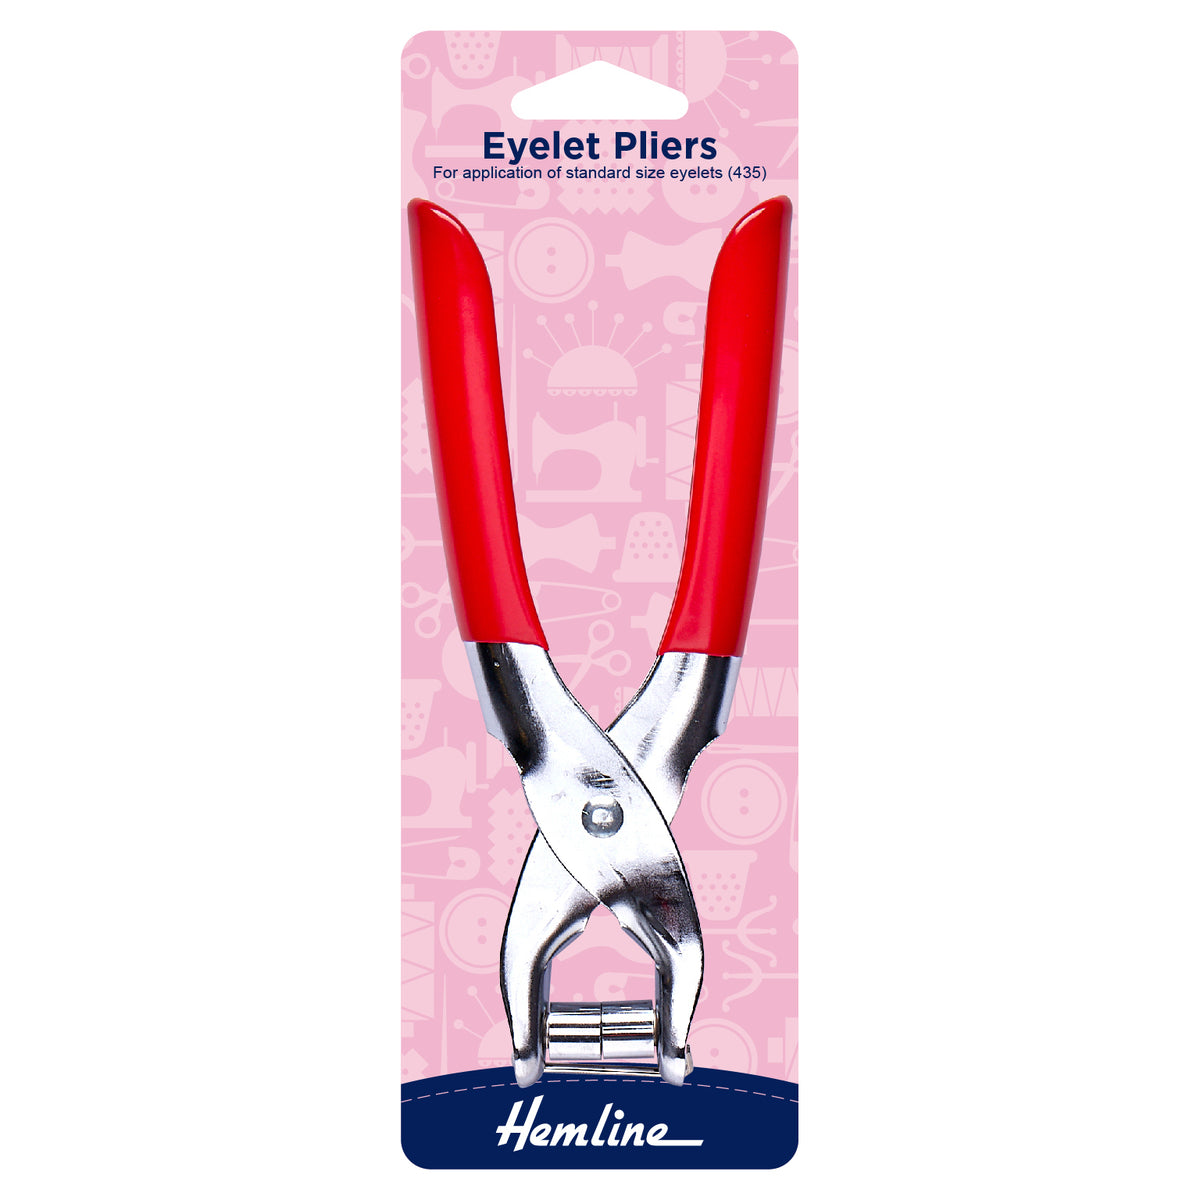 Eyelet Pliers - For Standard Size Eyelets 5mm